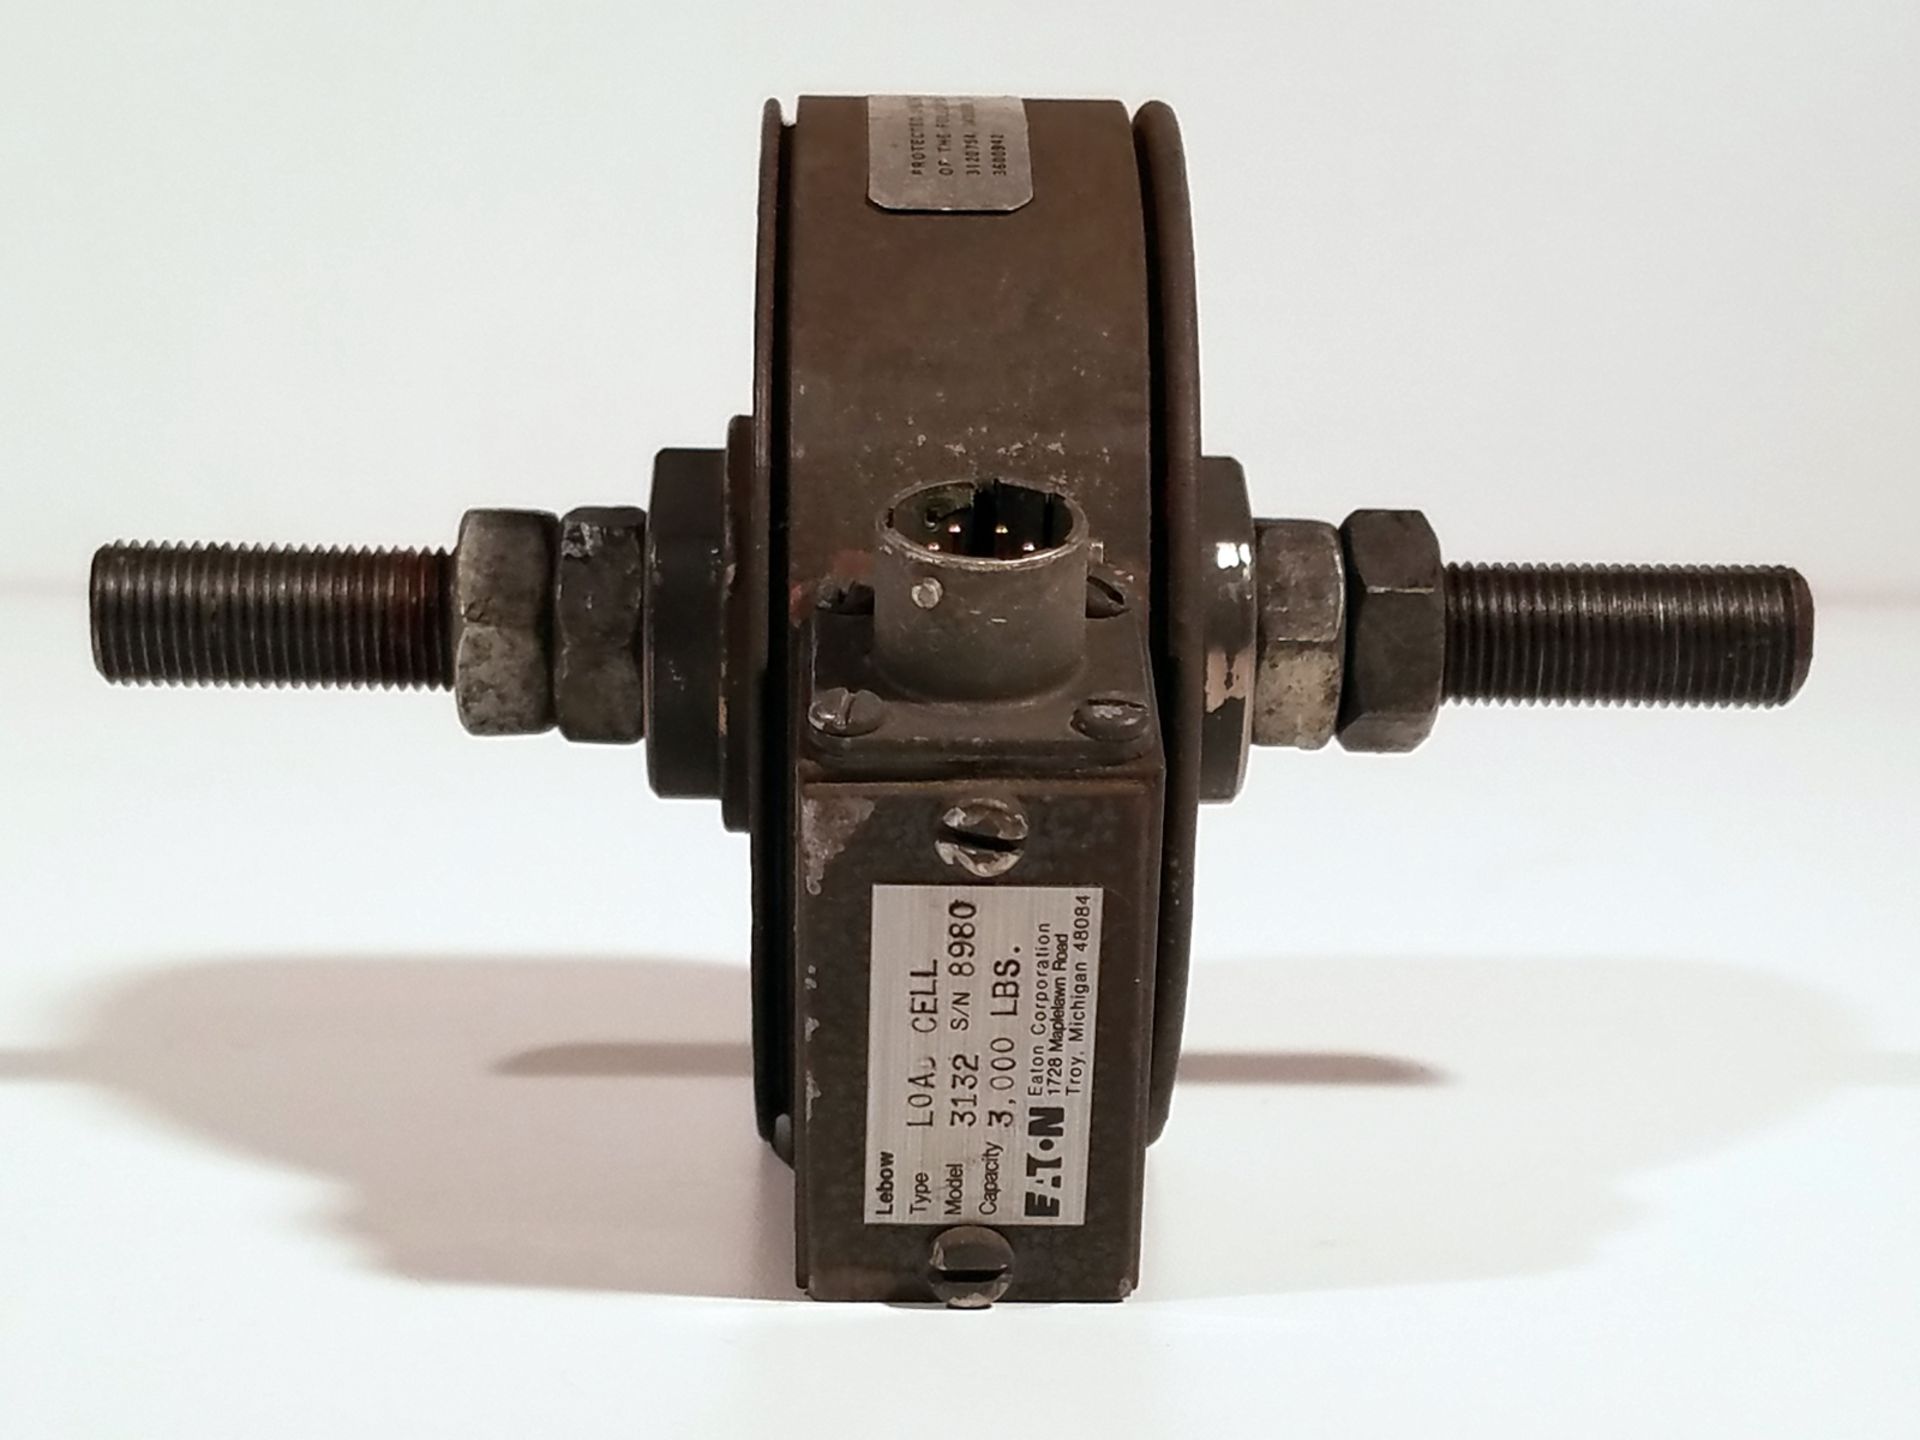 Eaton/Lebow 3132 Load Cell, 3,000 lbs 3132-3K - Image 2 of 4